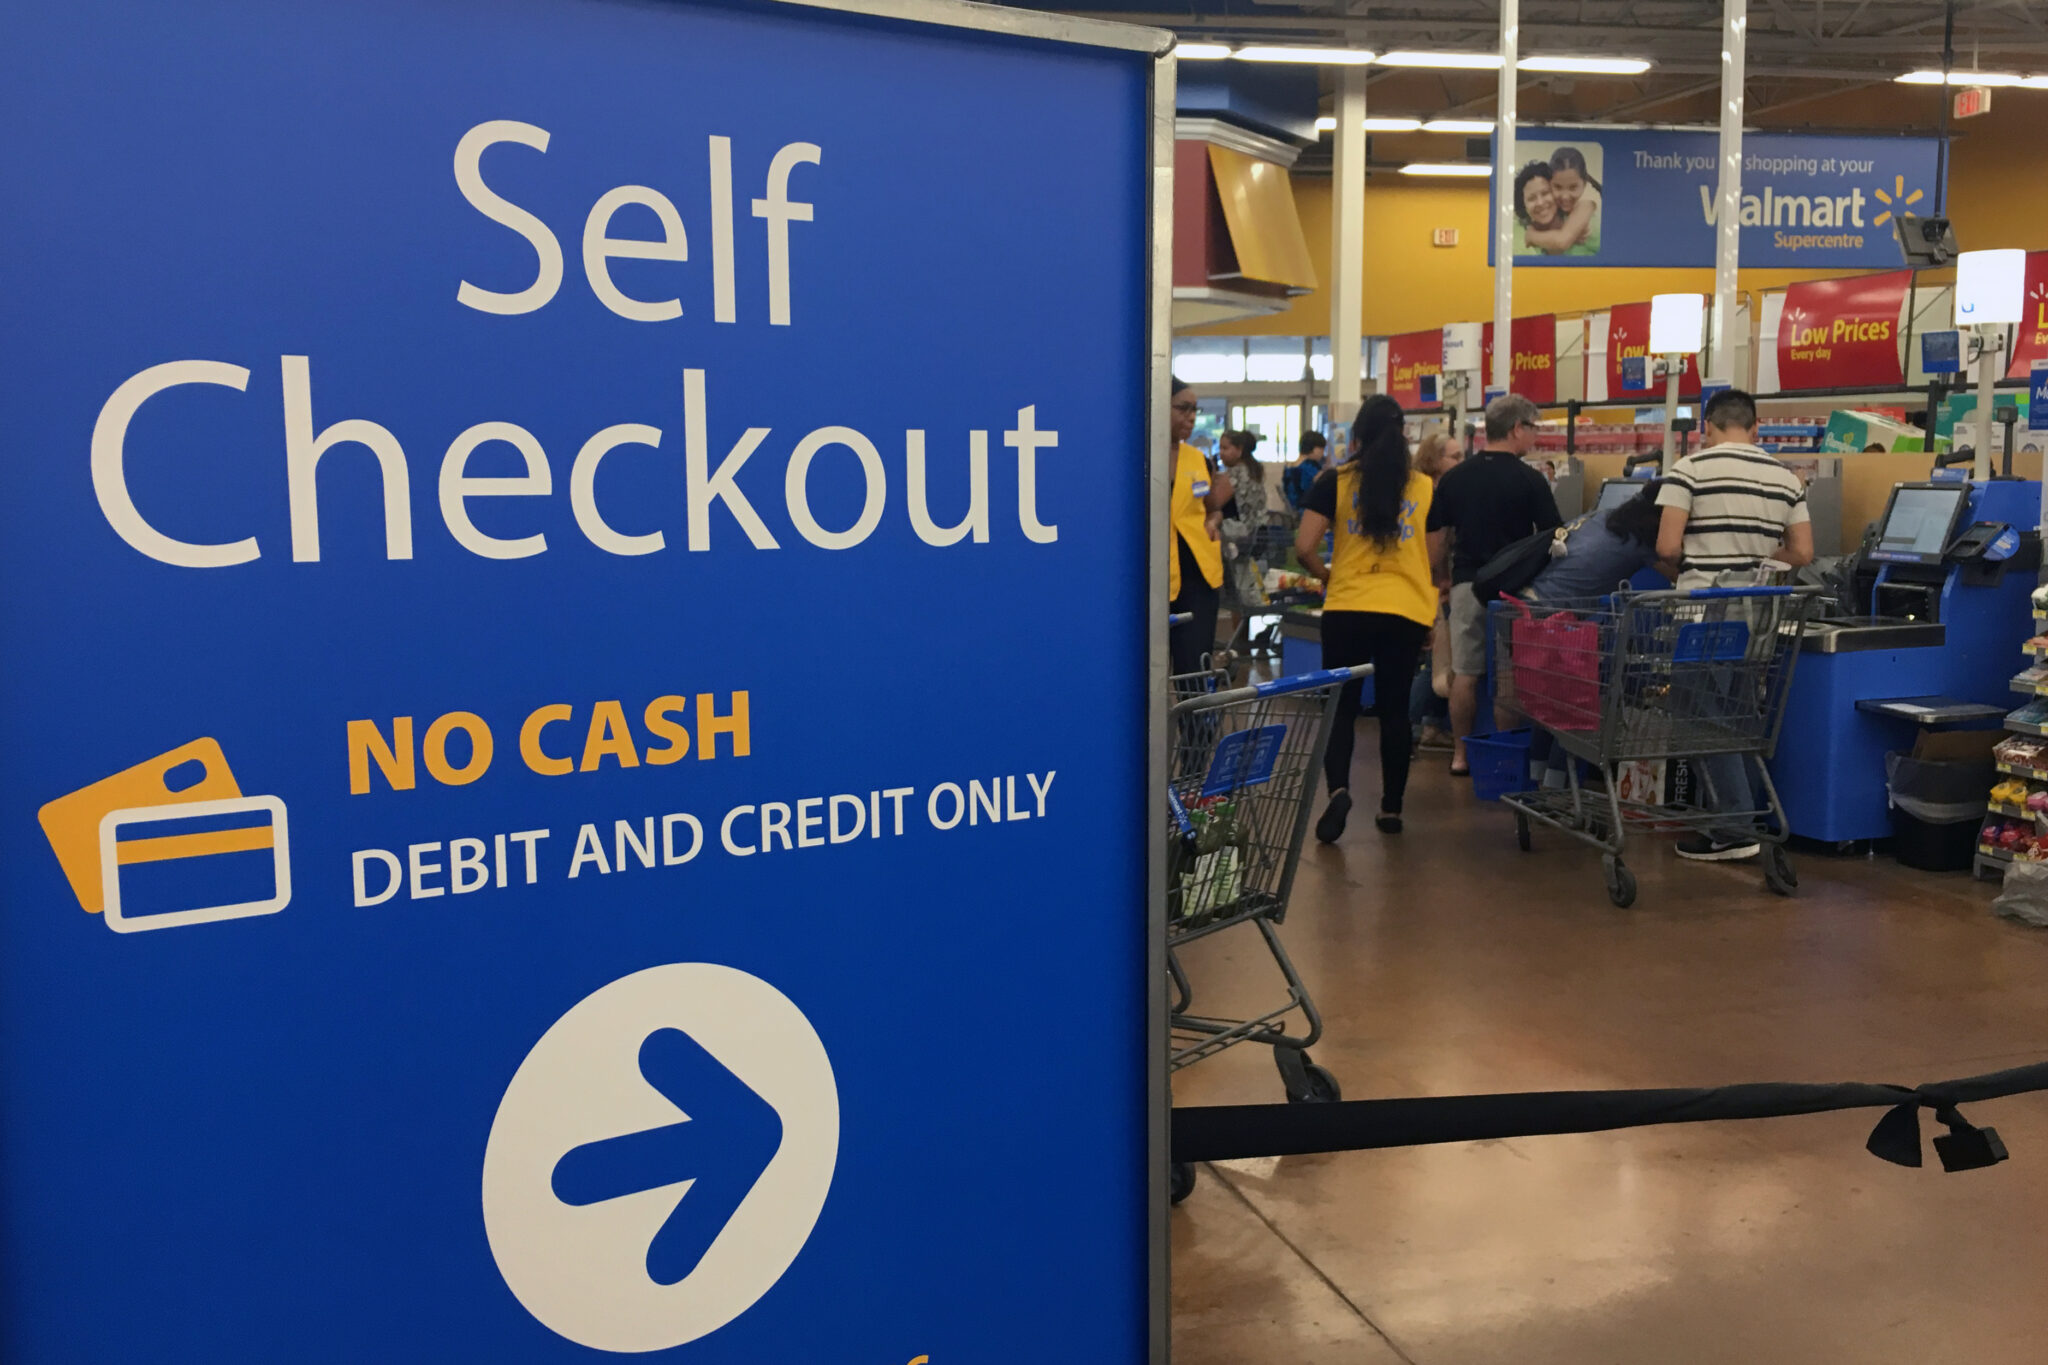 Walmart staffers have claimed the behavior of some shoppers makes alleged shoplifters easy to spot